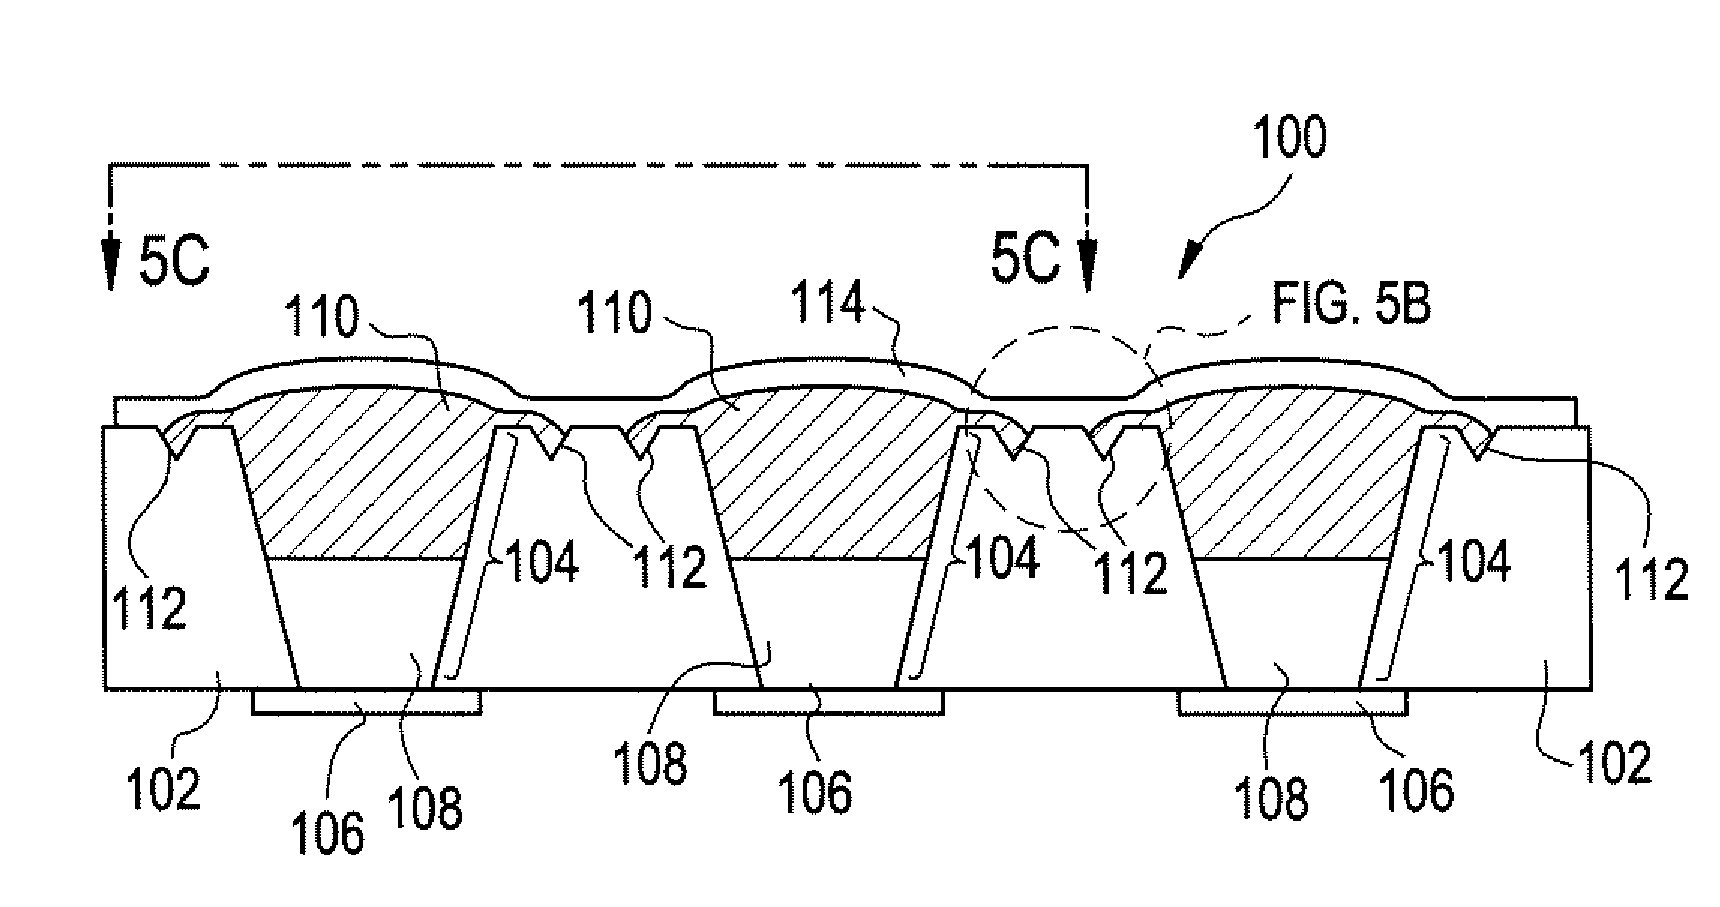 Hermetically Sealed Devices for Controlled Release or Exposure of Reservoir Contents